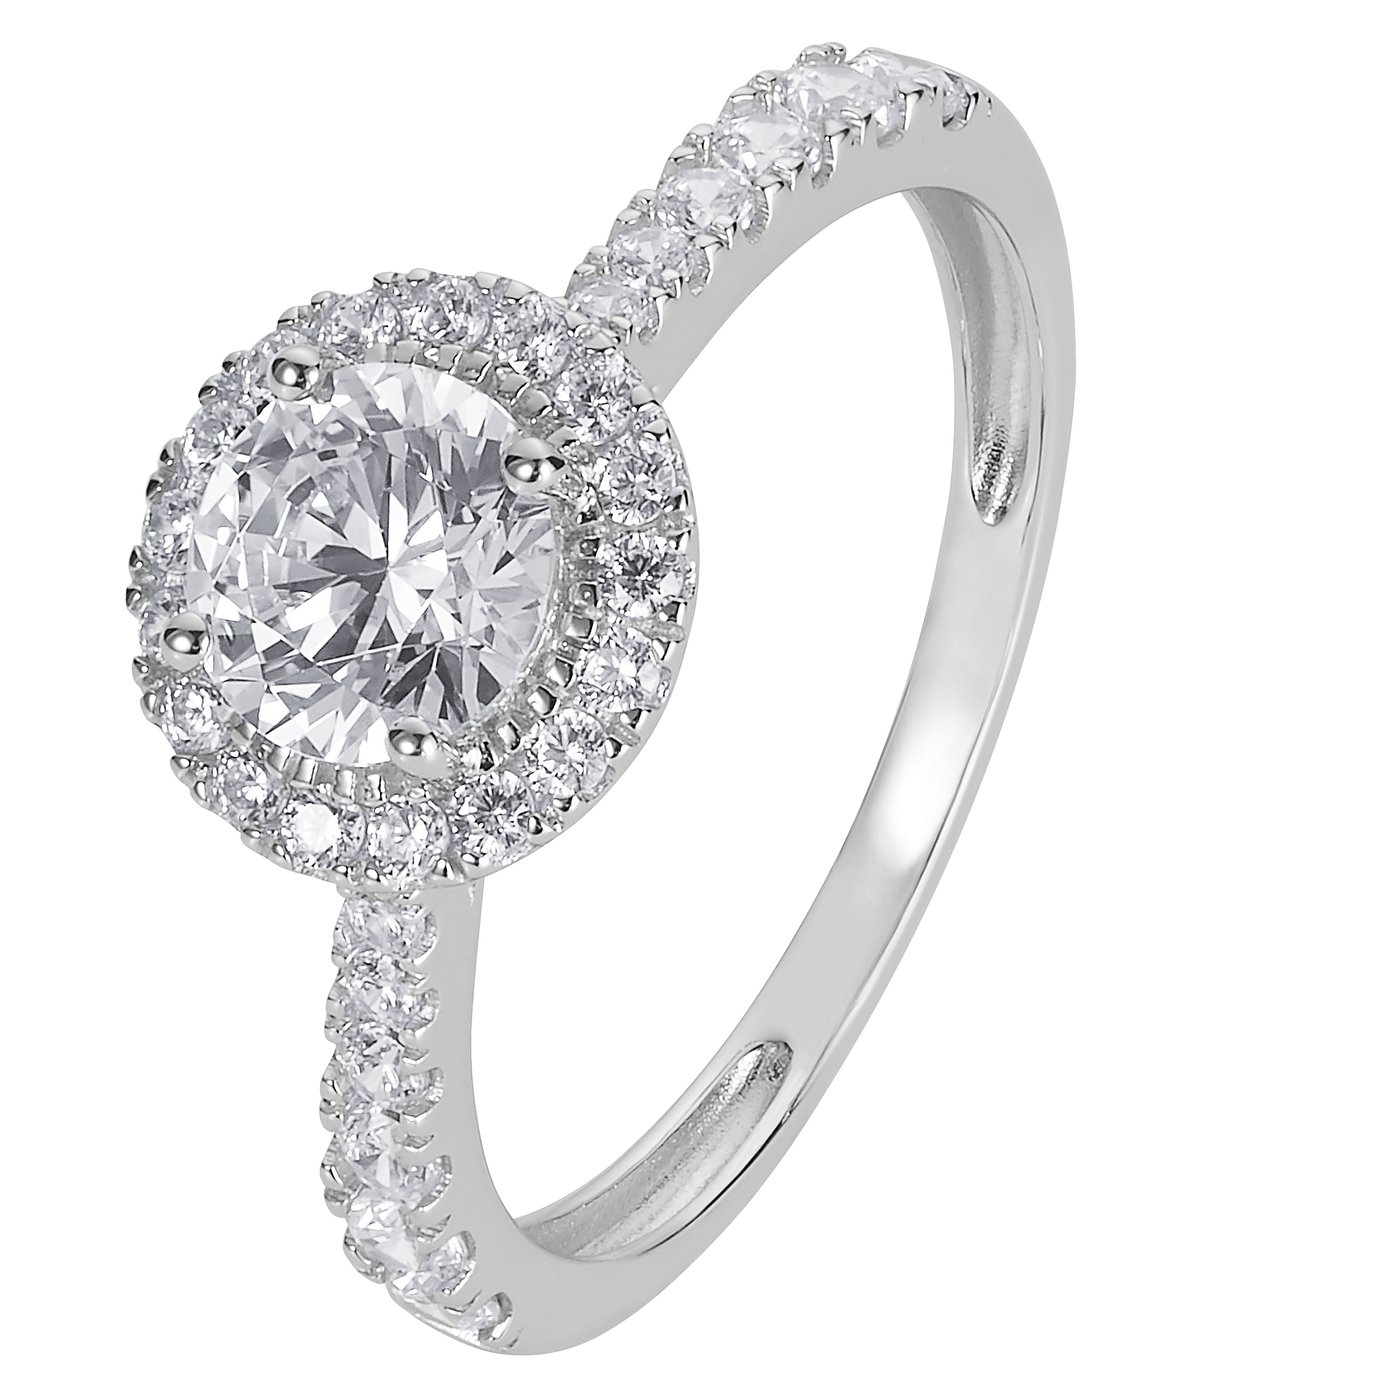 Revere 9ct White Gold Cubic Zirconia Halo Engagement Ring Q